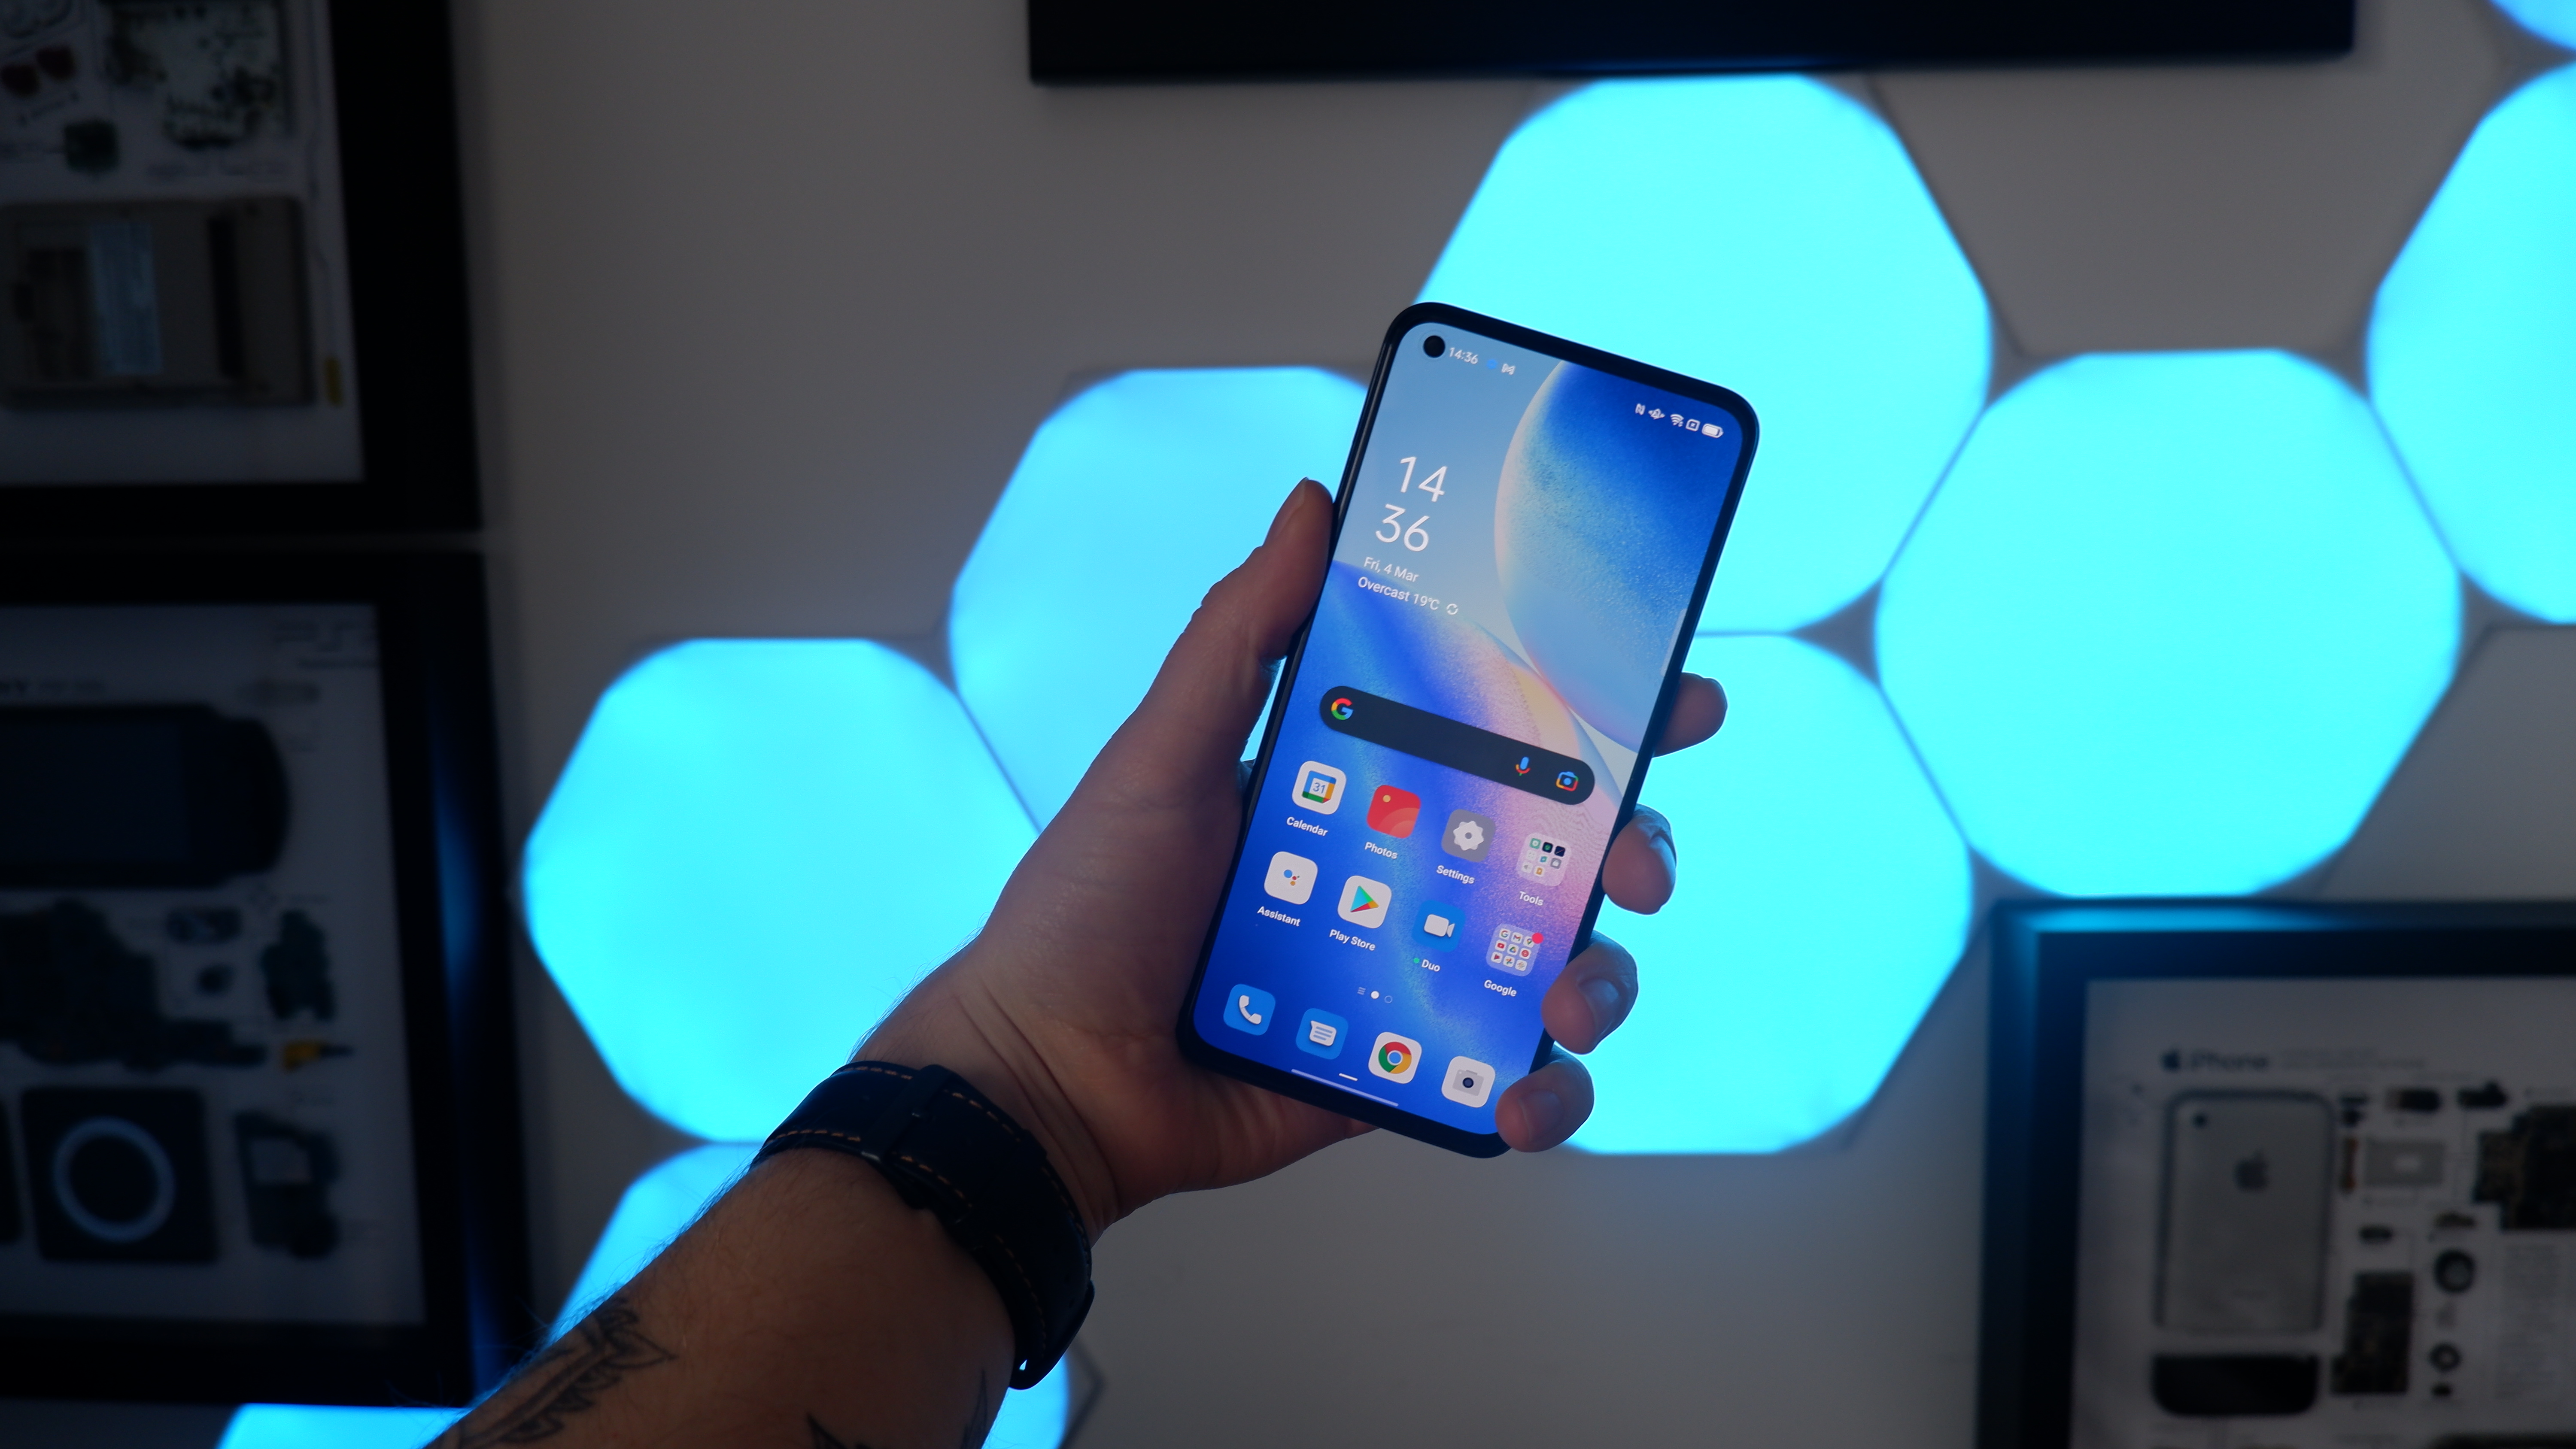 Oppo Find X3 Lite smartphone review: Fast mid-ranger with a 90 Hz OLED  panel and a 65-watt power adapter -  Reviews